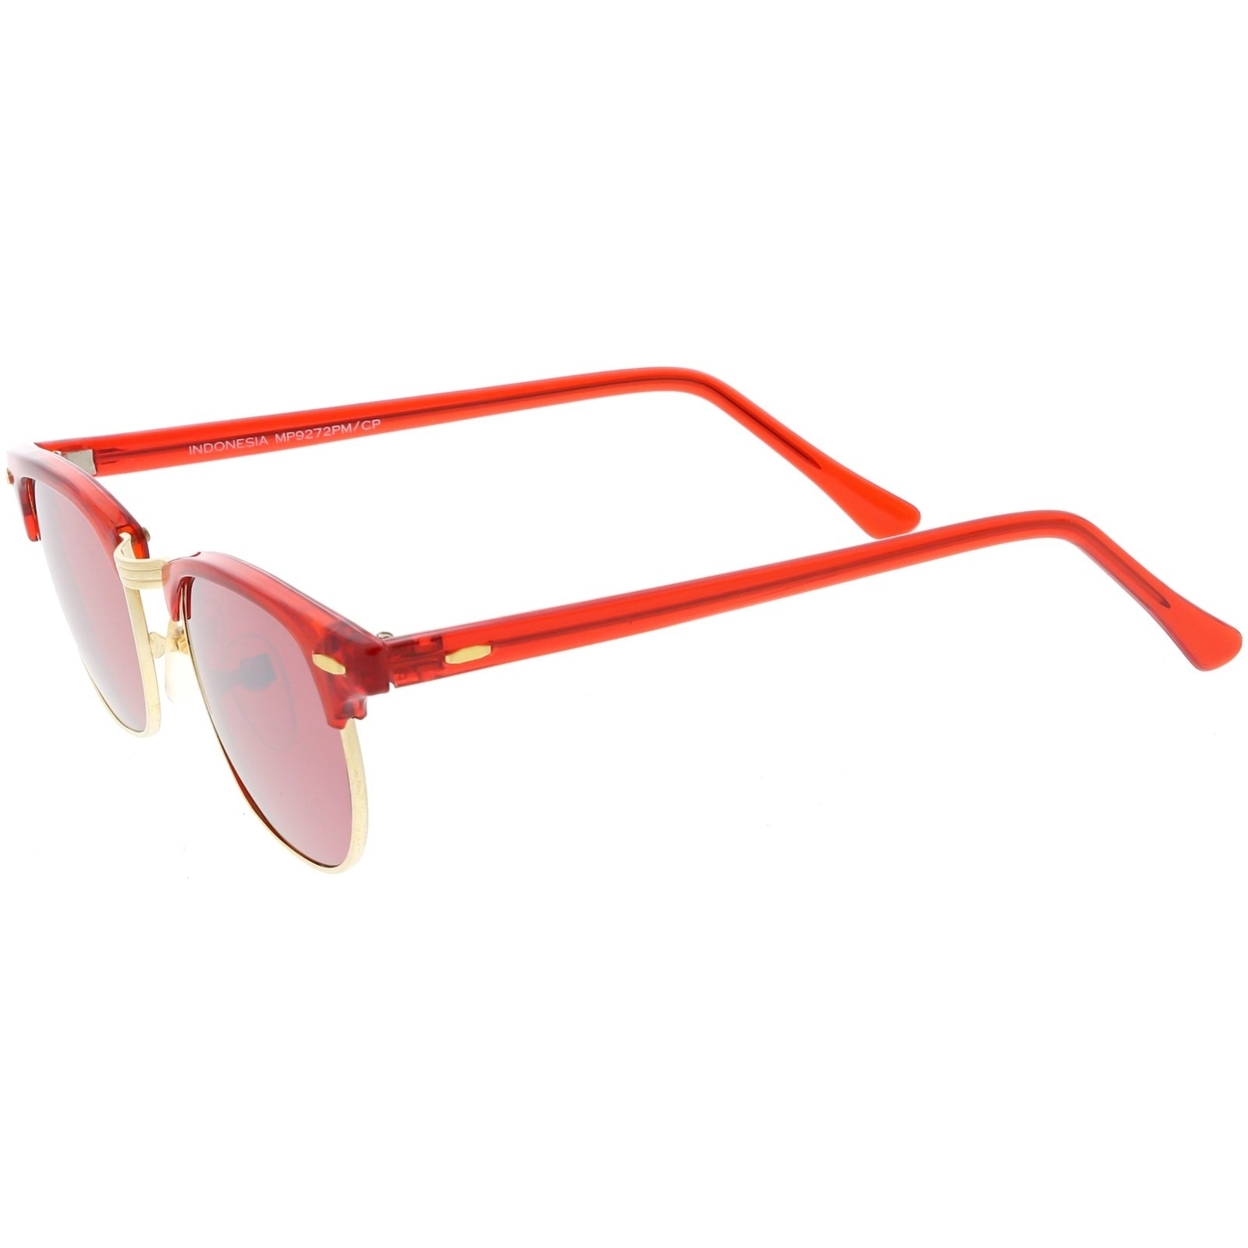 True Vintage Horn Rimmed Semi Rimless Sunglasses Mirrored Square Lens 49mm - Red / Red Mirror